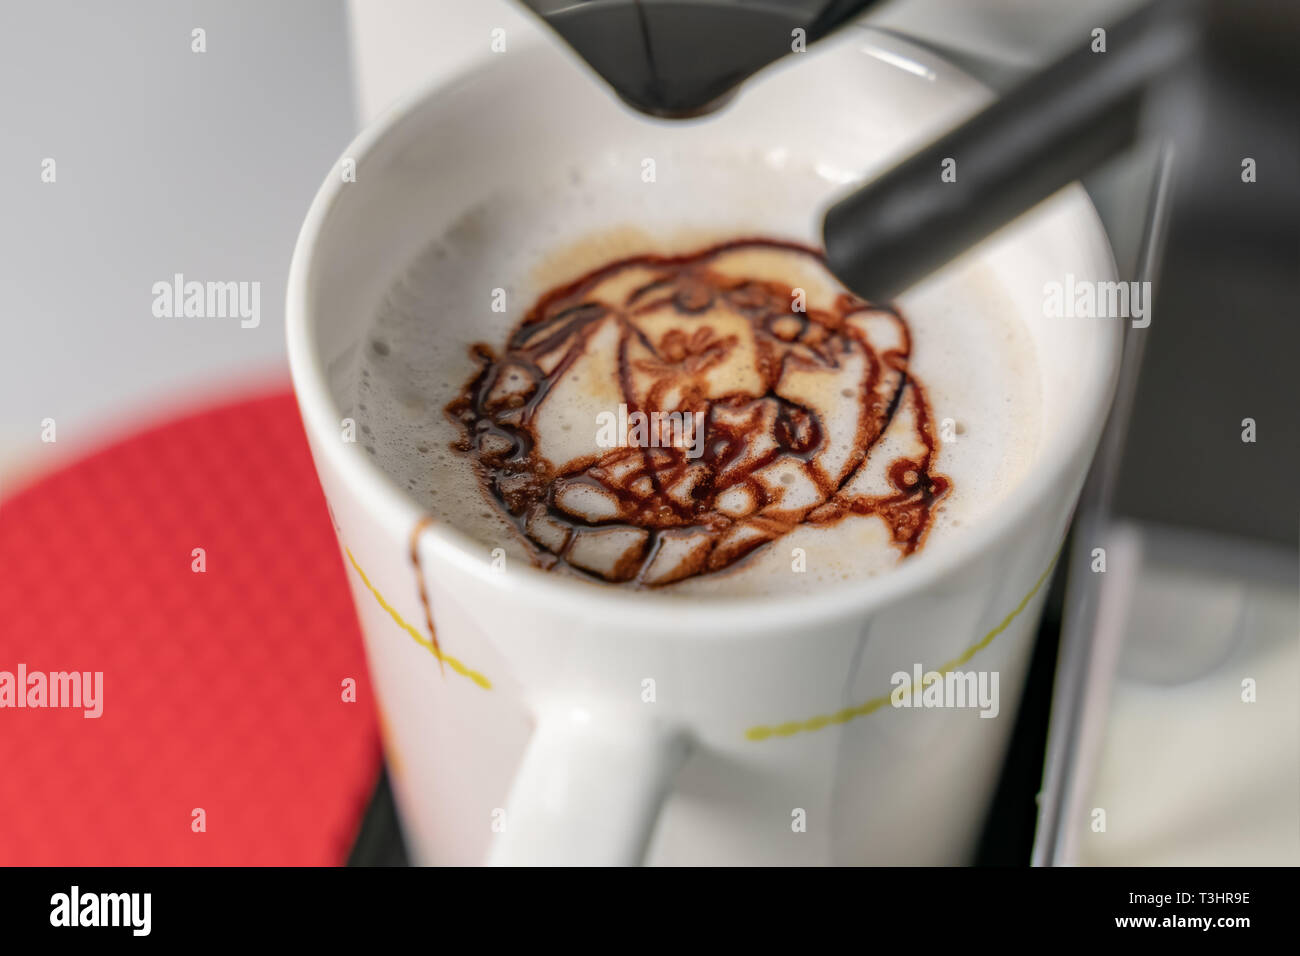 Making cappuccino. View of espresso pouring from the coffee machine. Cappuccino has the main ingredients are Espresso and milk. Blurred background Stock Photo